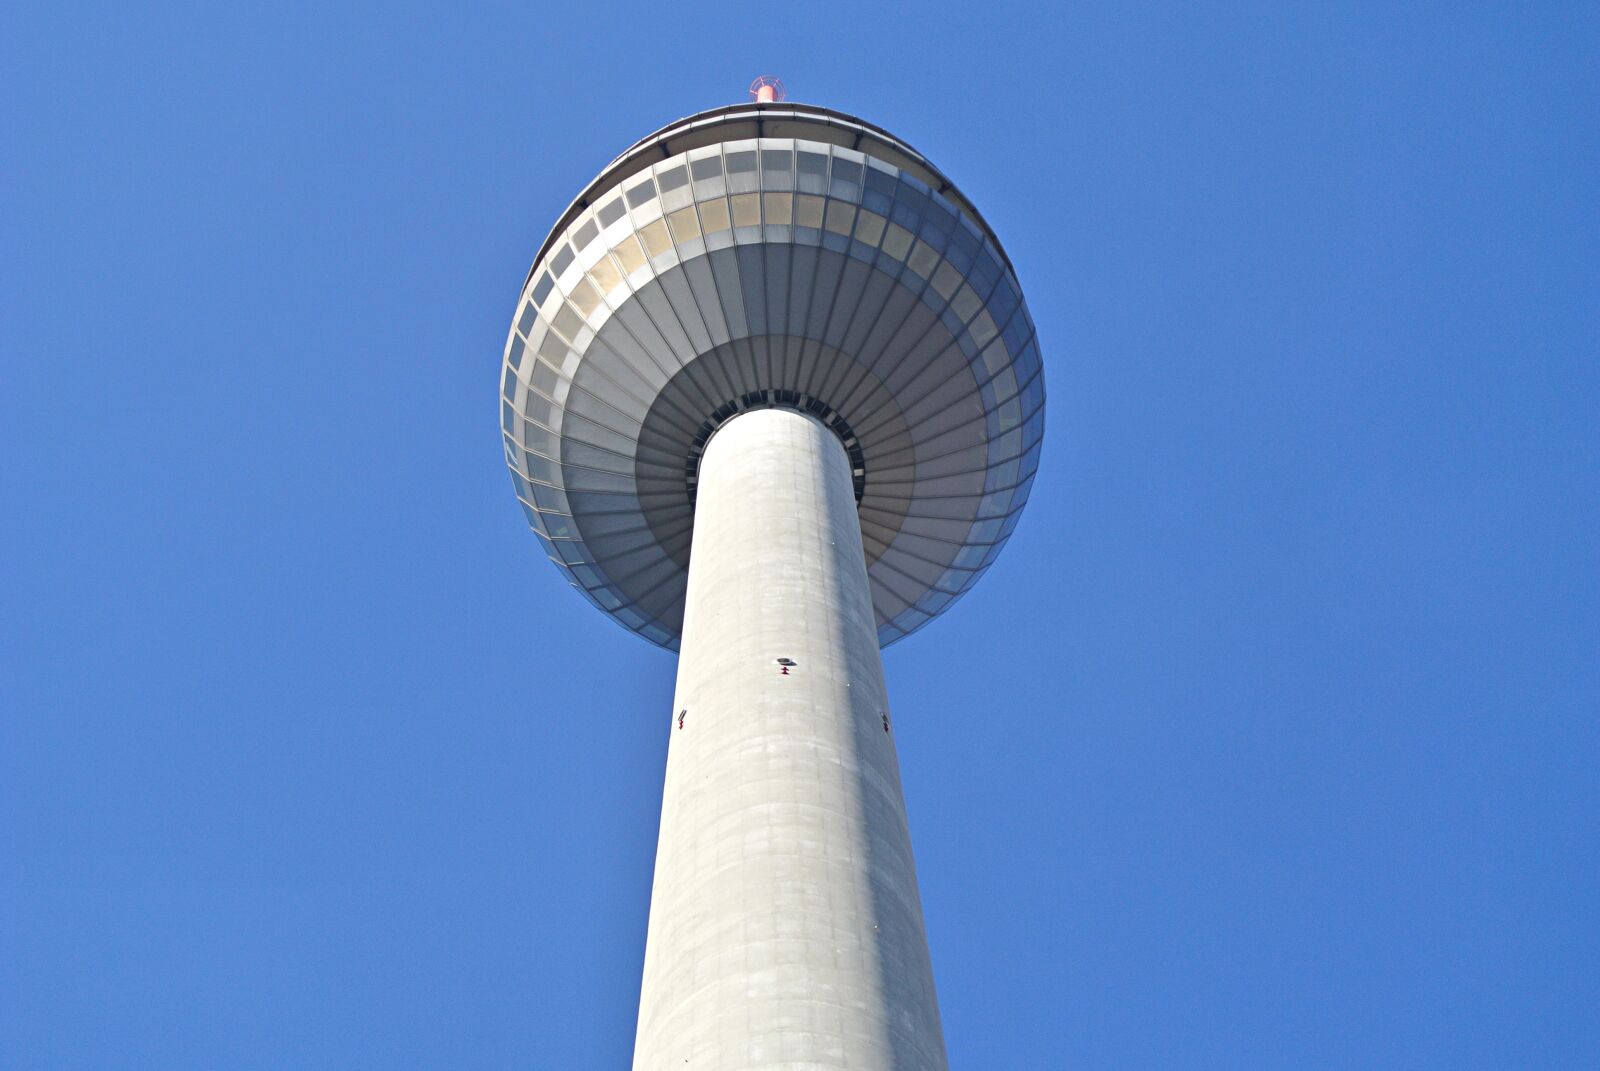 Nikon 1 J1 sample photo. Tv tower, tower, architecture photography